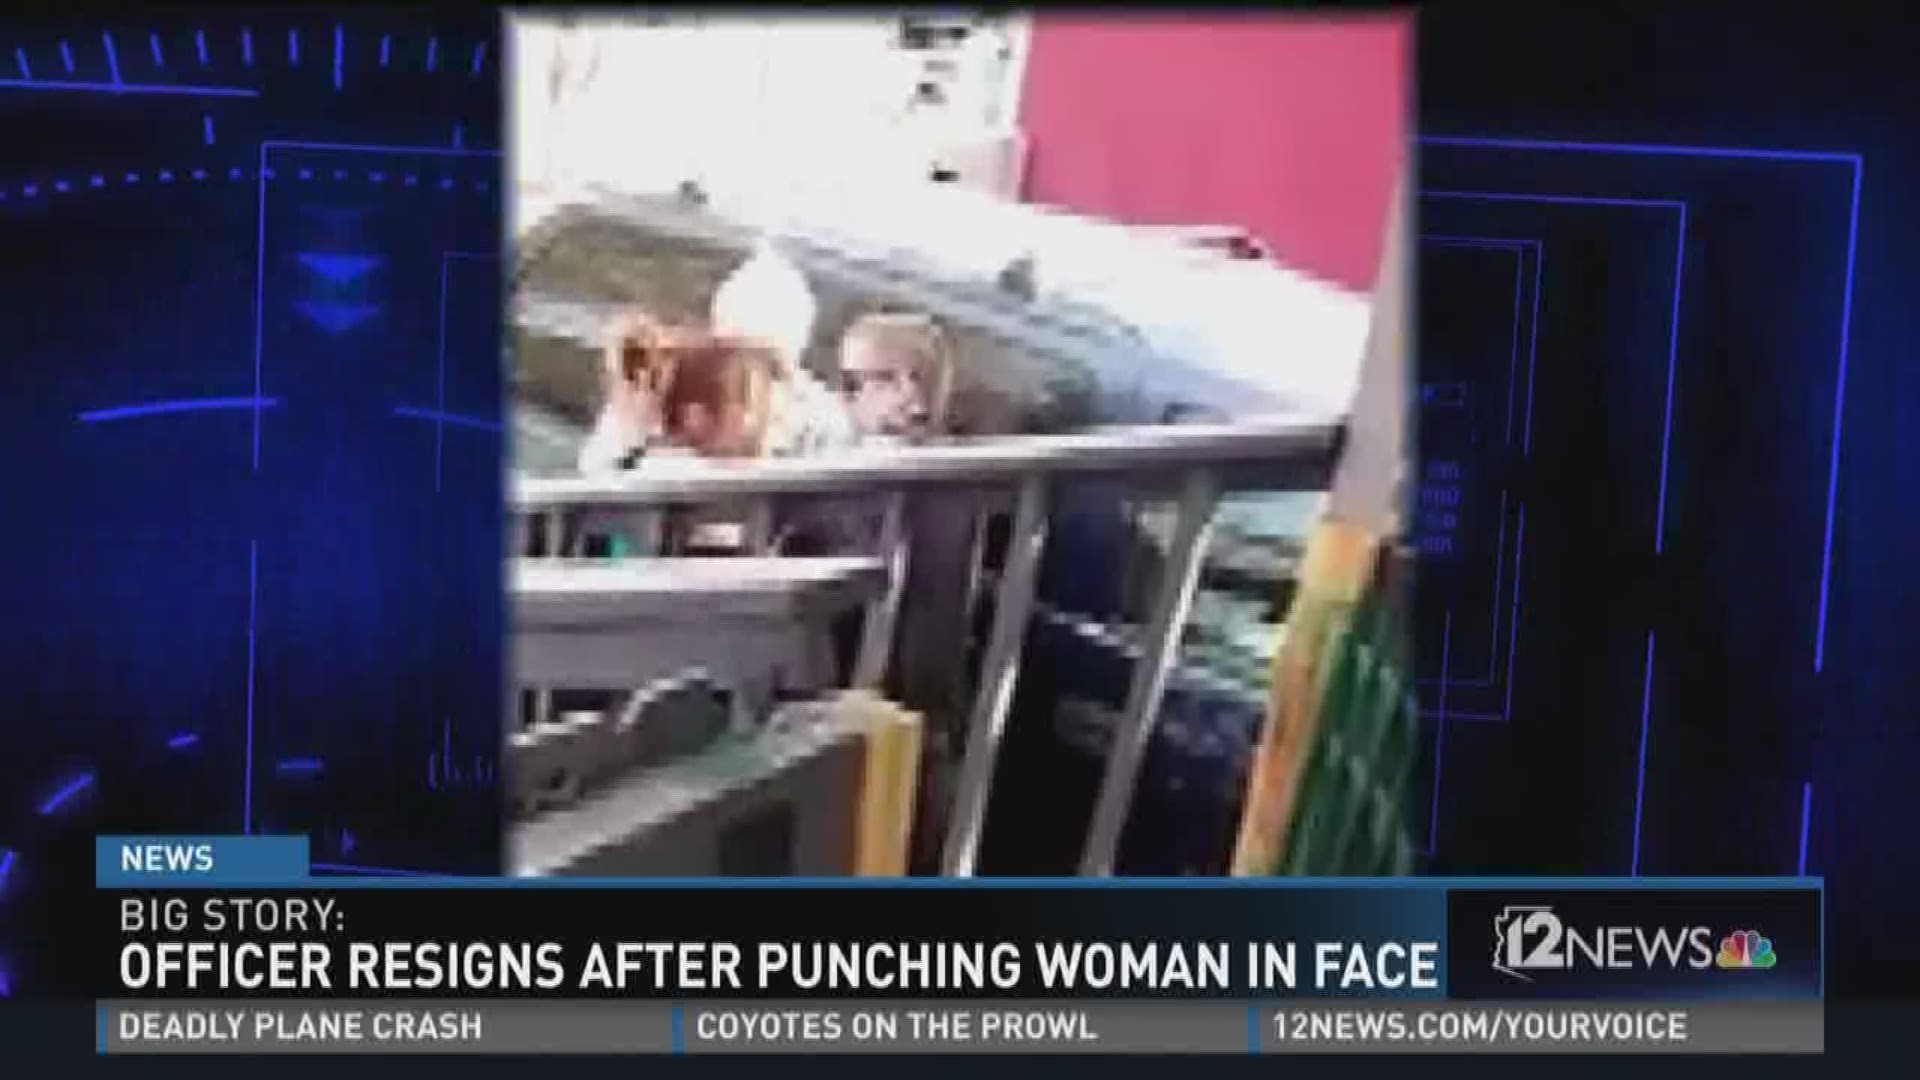 A Flagstaff police officer resigned rather than being fired after he punched a woman in the face.